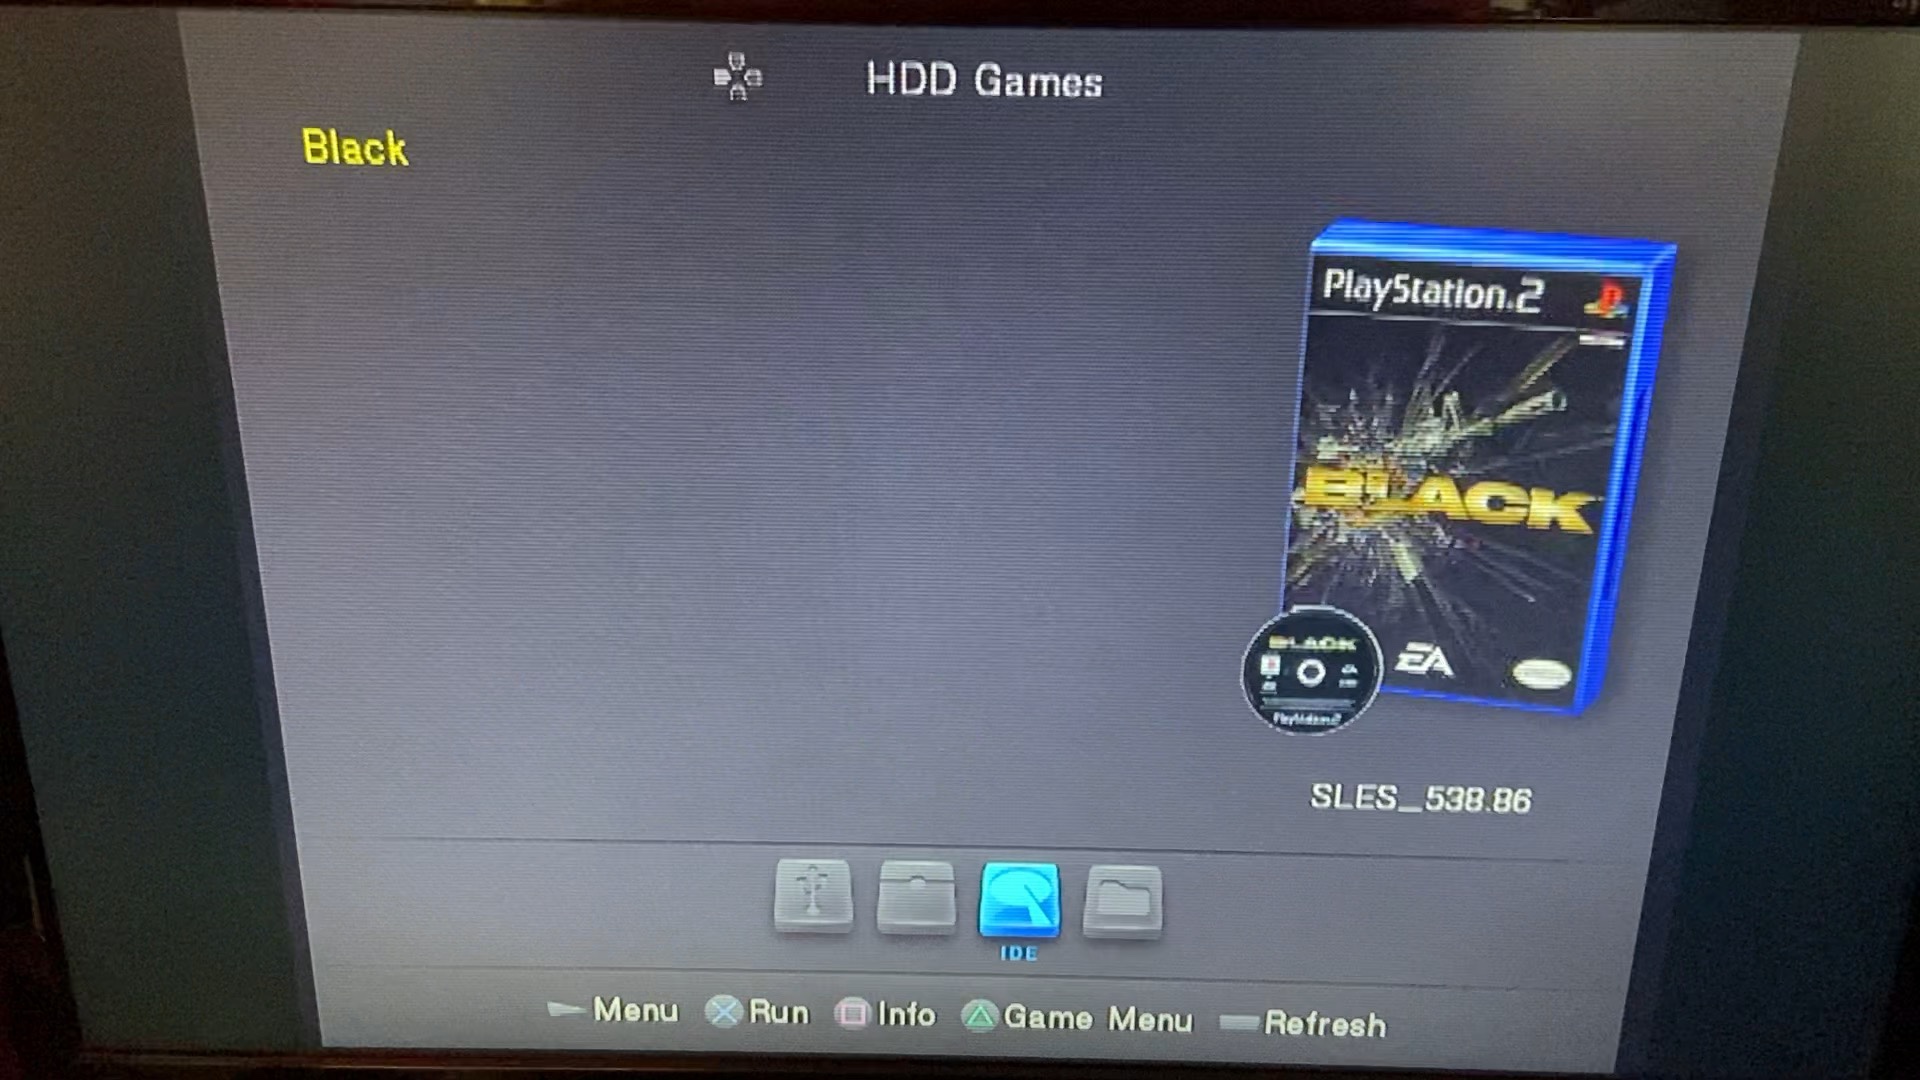 Game installed on an SSD in a PlayStation 2